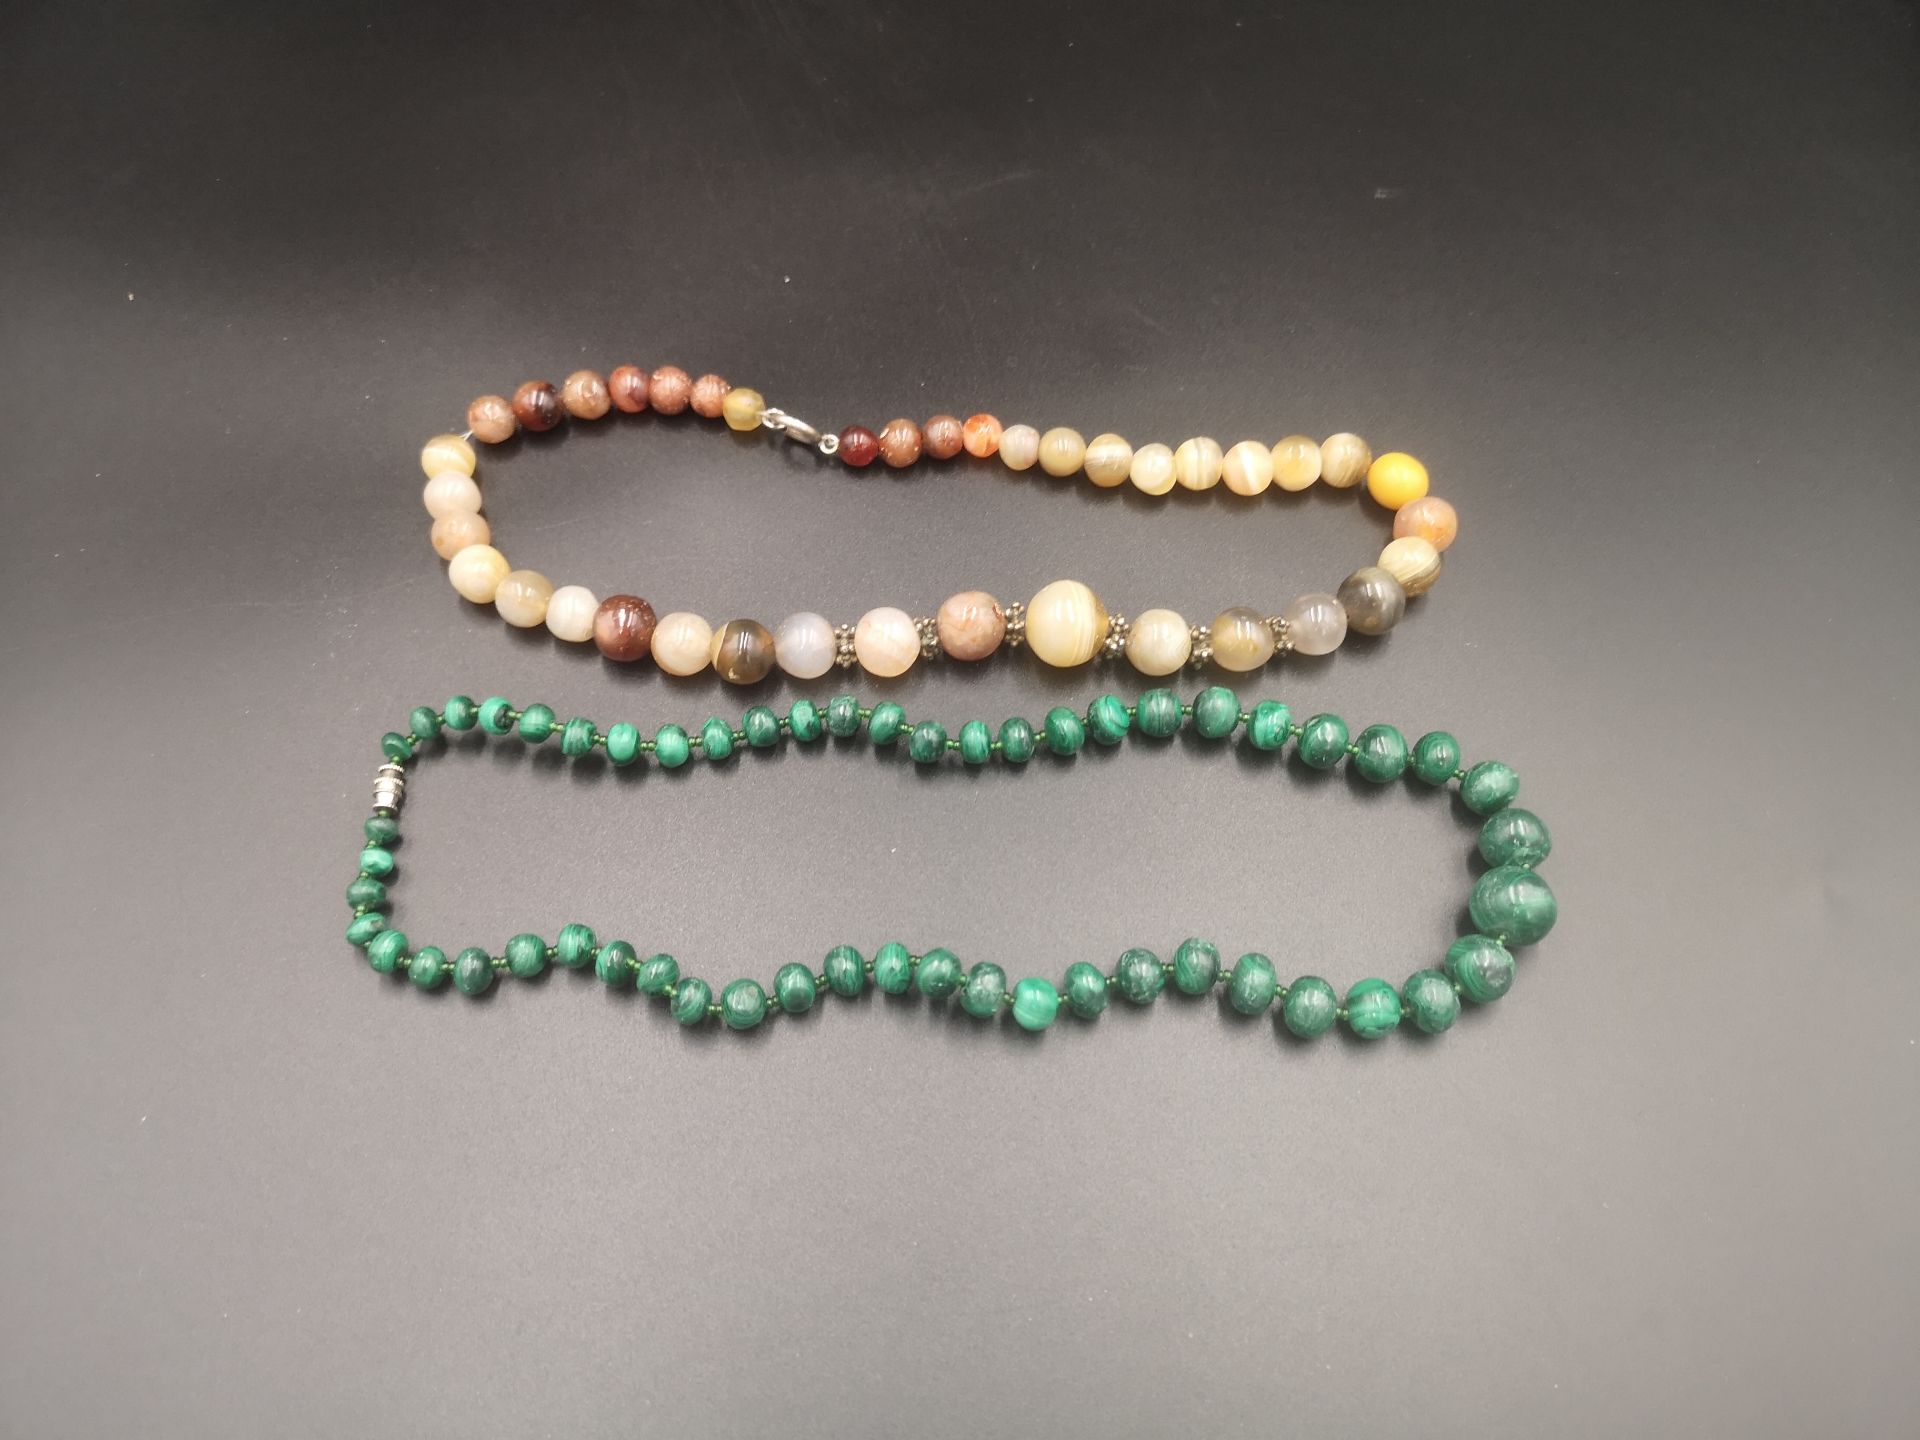 Malachite necklace together with an onyx necklace